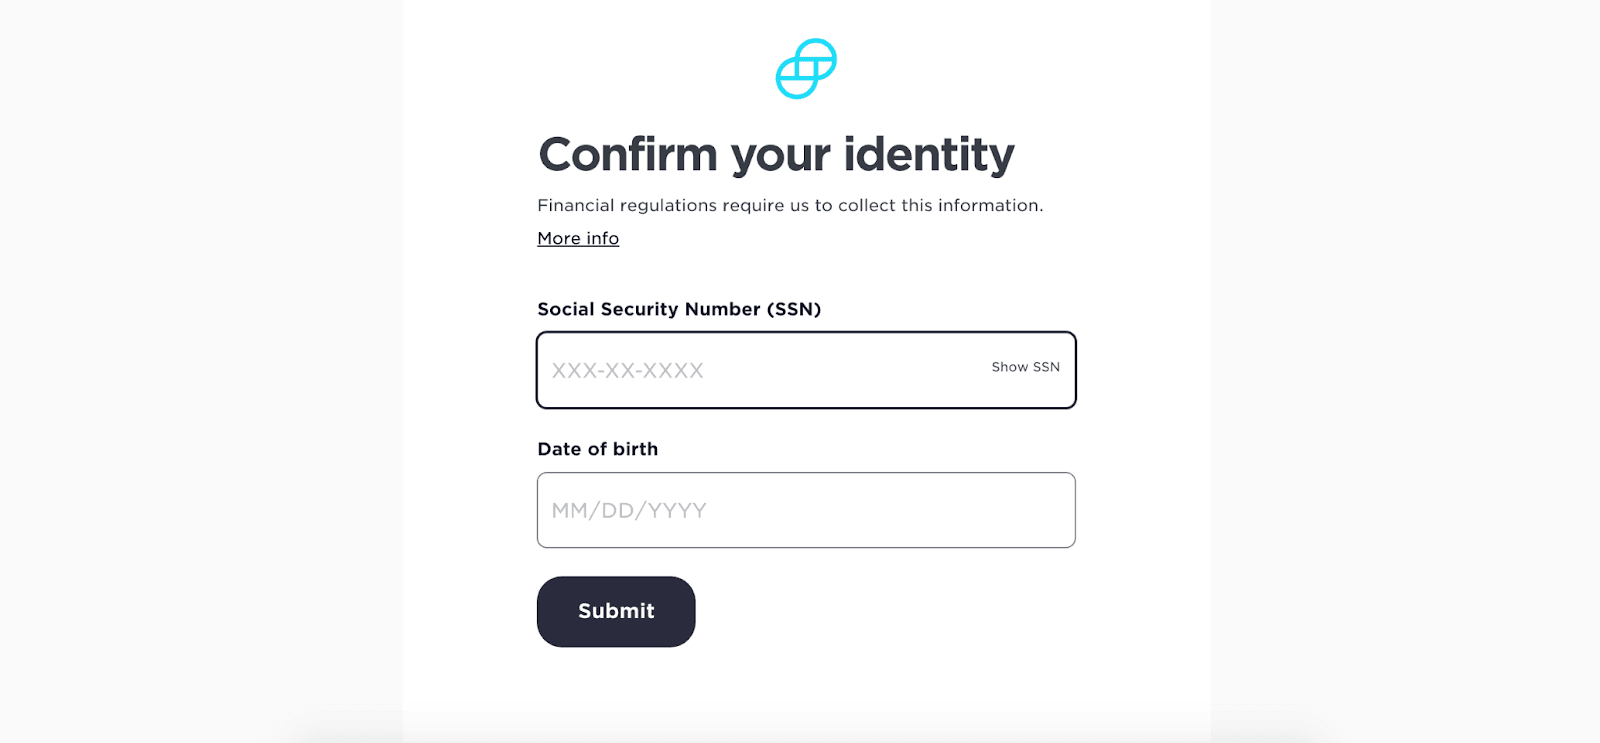 Gemini Review: Learn About Cryptocurrency While You Invest - Confirm your identity